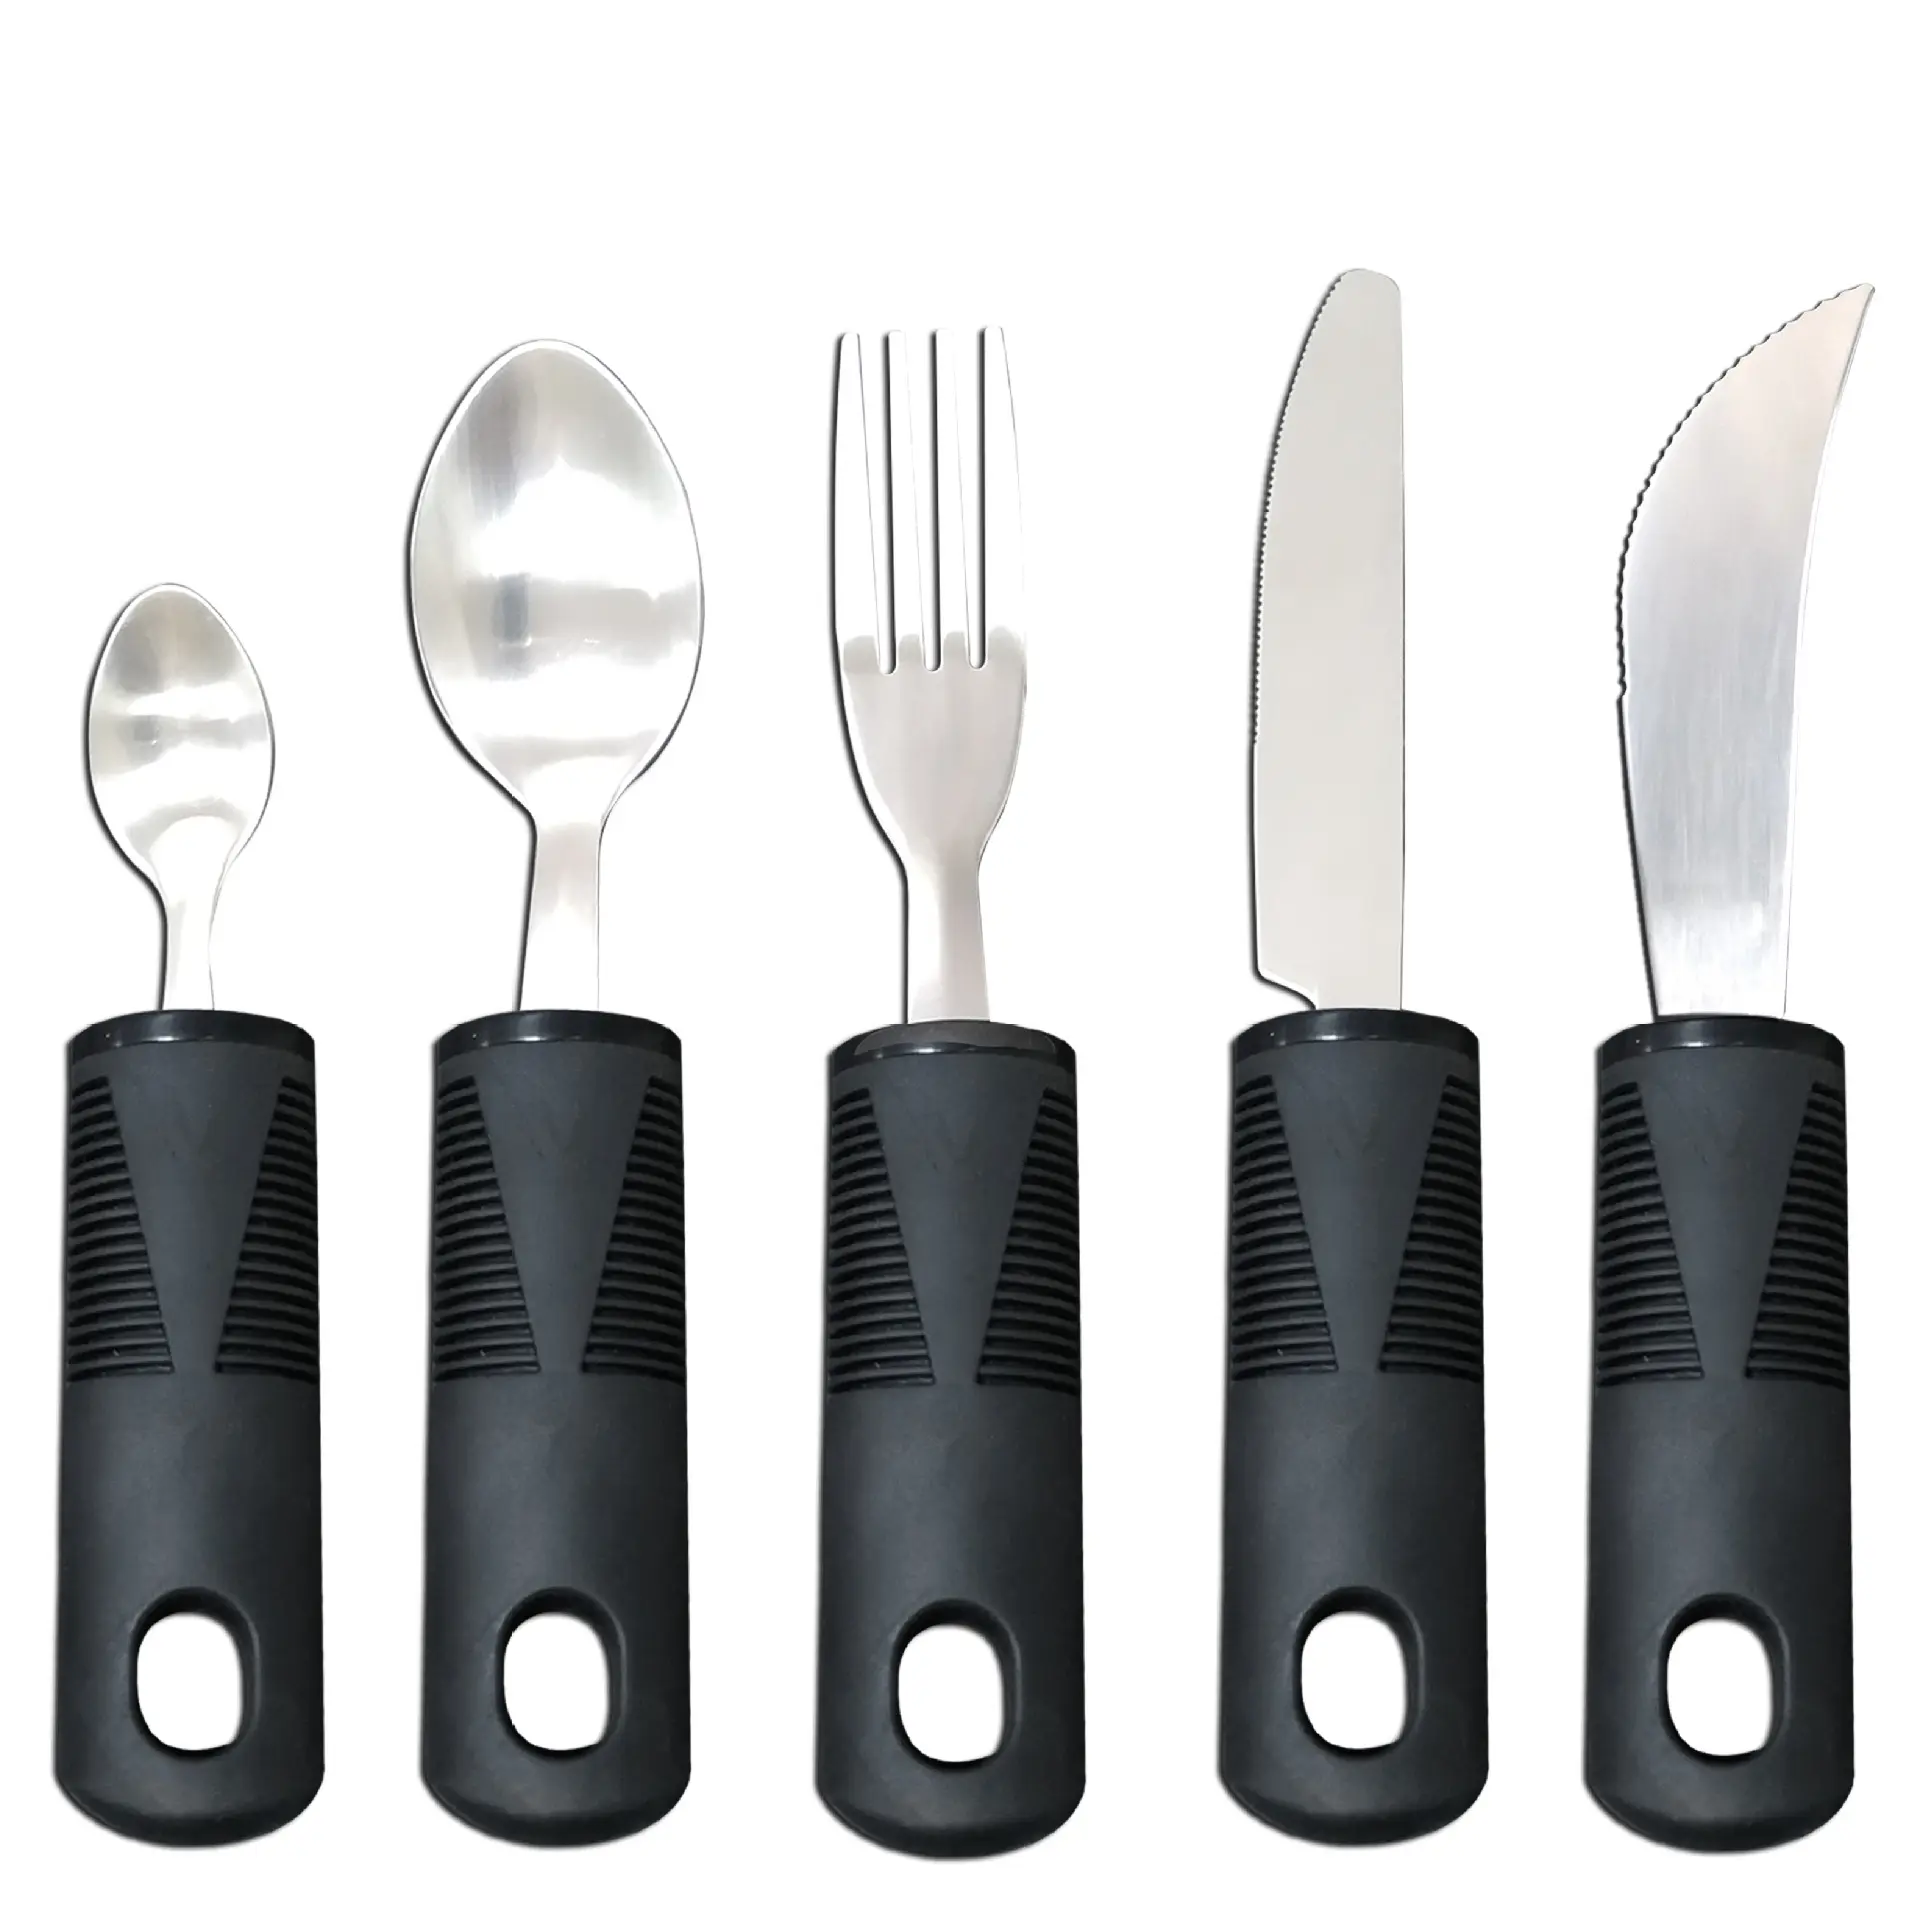 Soft Rubber Handle Anti-Shake Adaptive Tableware Set Stocked Food Aid for Disabled Elderly-for Knife Fork Spoon Rehabilitation